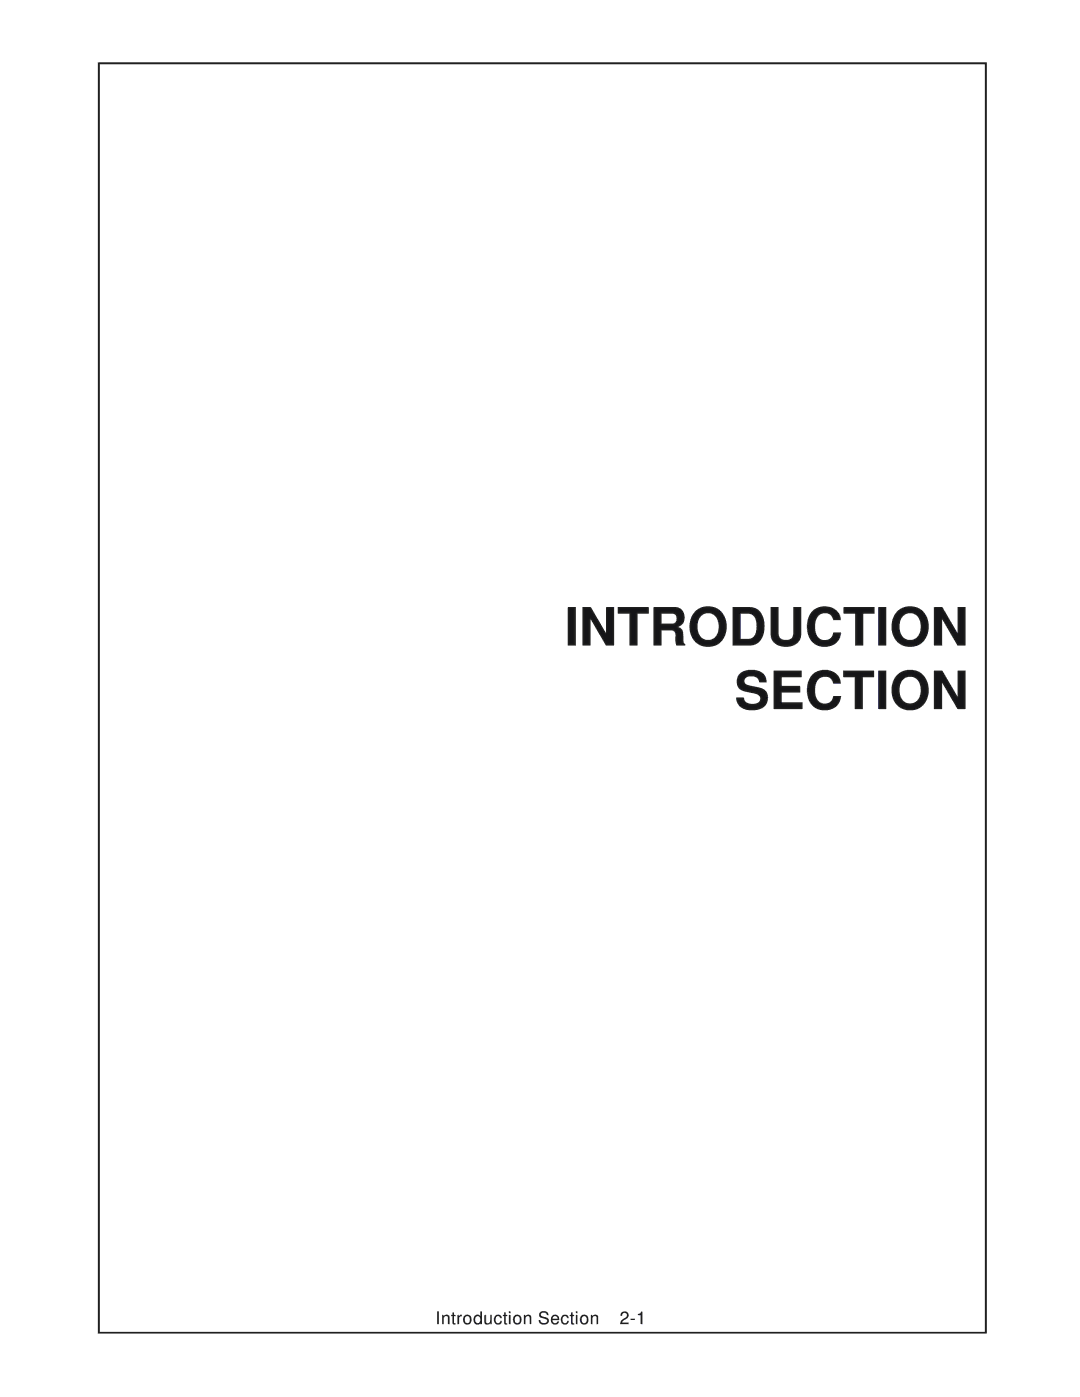 Tiger RBF-2C manual Introduction Section 